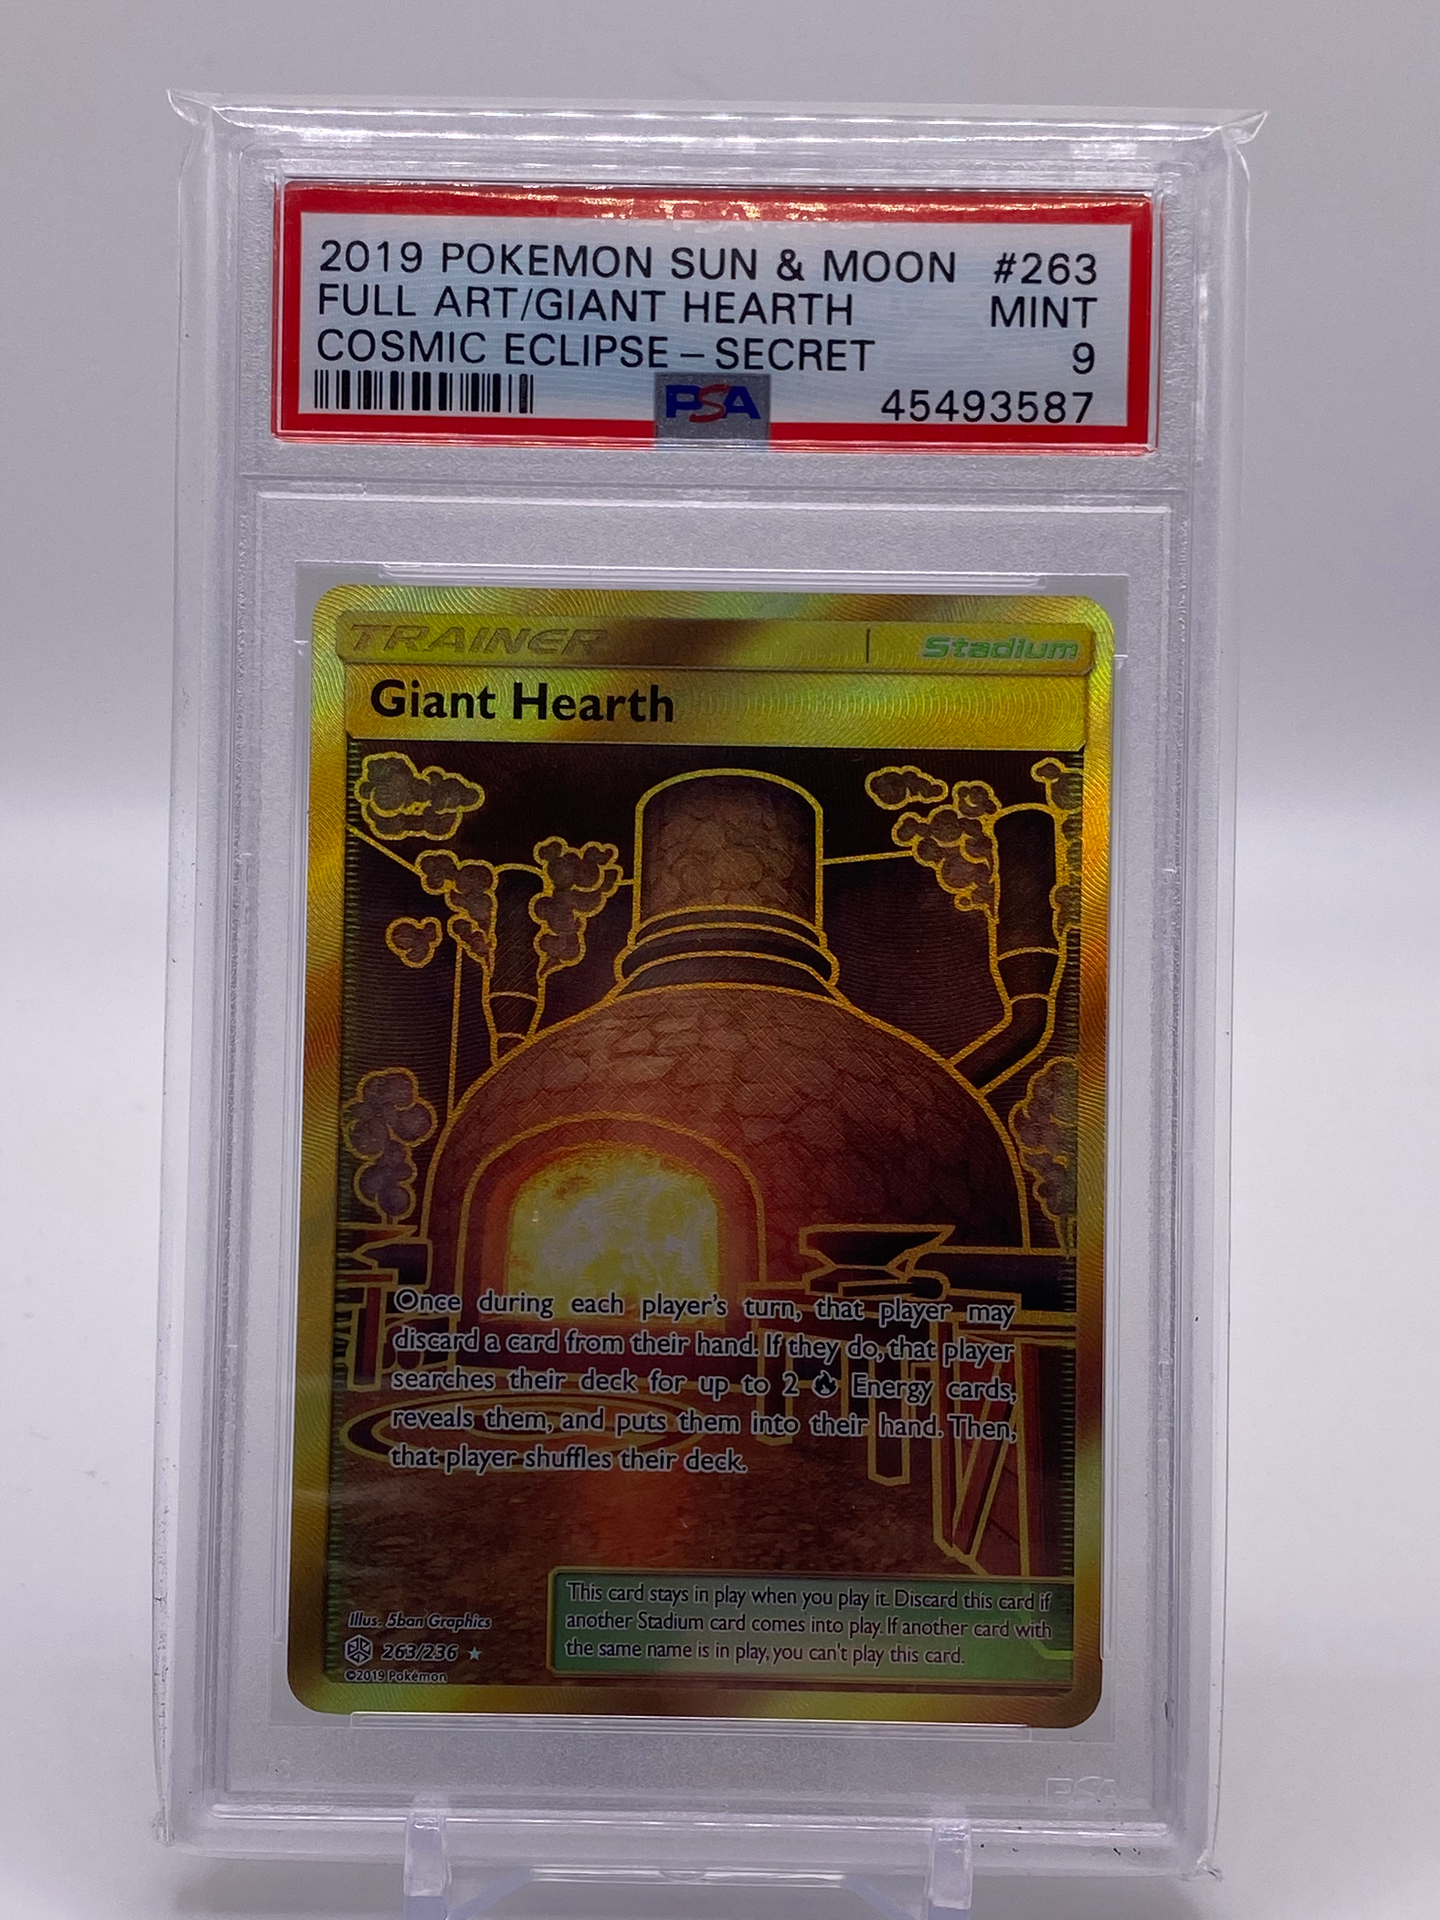 PSA 9 Giant Hearth Gold (Graded Card)